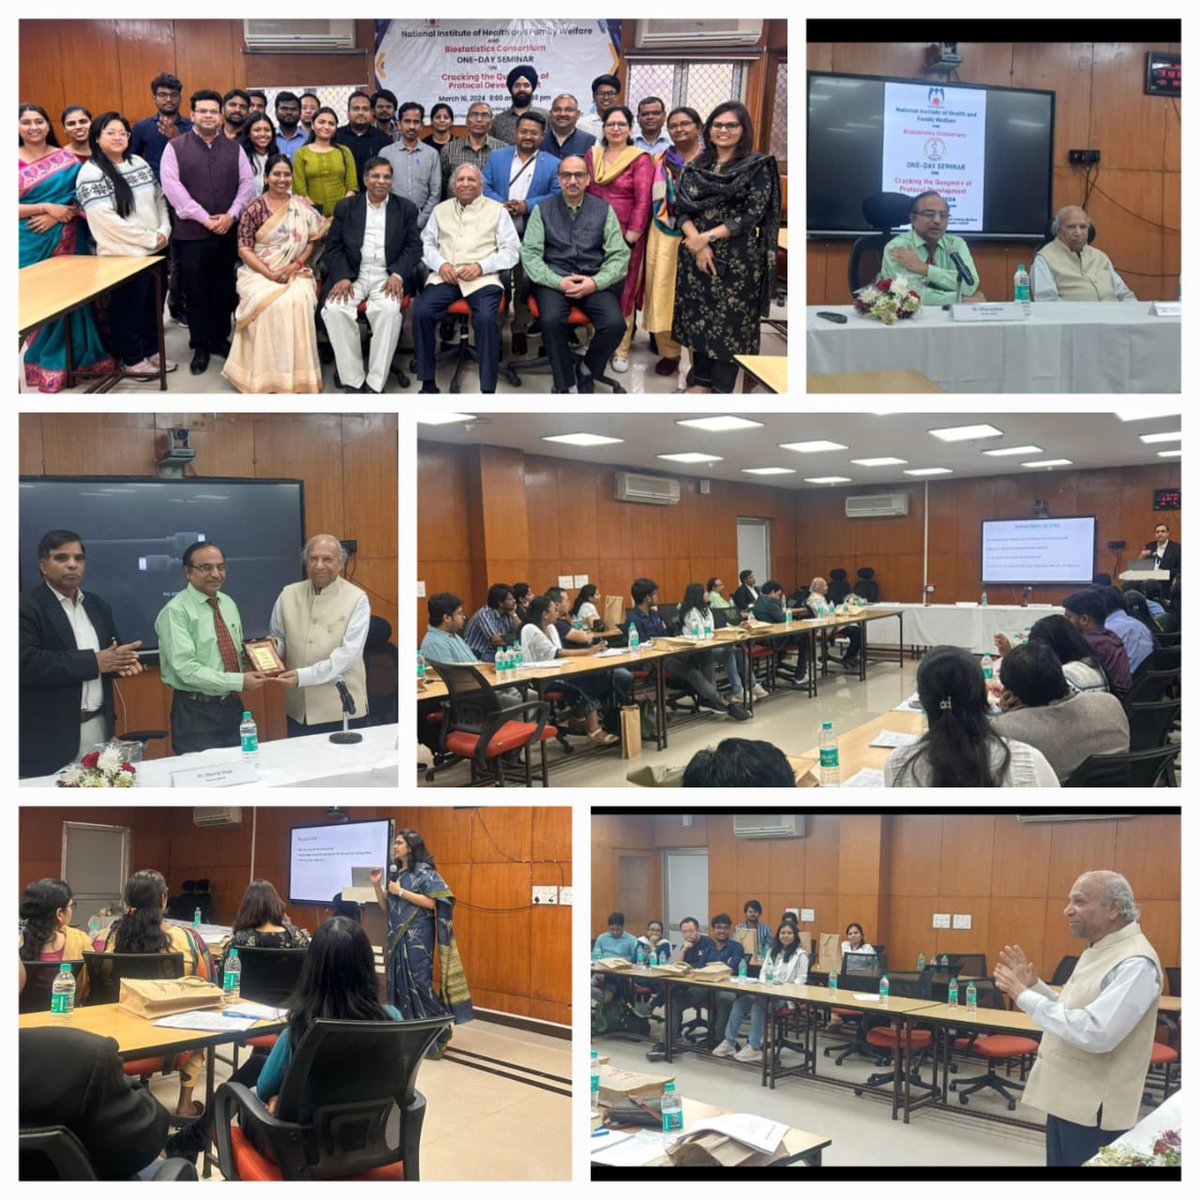 *NIHFW is dedicated for improving the quality of HealthResearch* 
#NIHFW in collaboration with BiostatisticsConsortium organized a Seminar *Cracking the Quagmire of Protocol Development* on 16.03.24. Attended by faculty, ResearchStaff and students of NIHFW & other organizations.